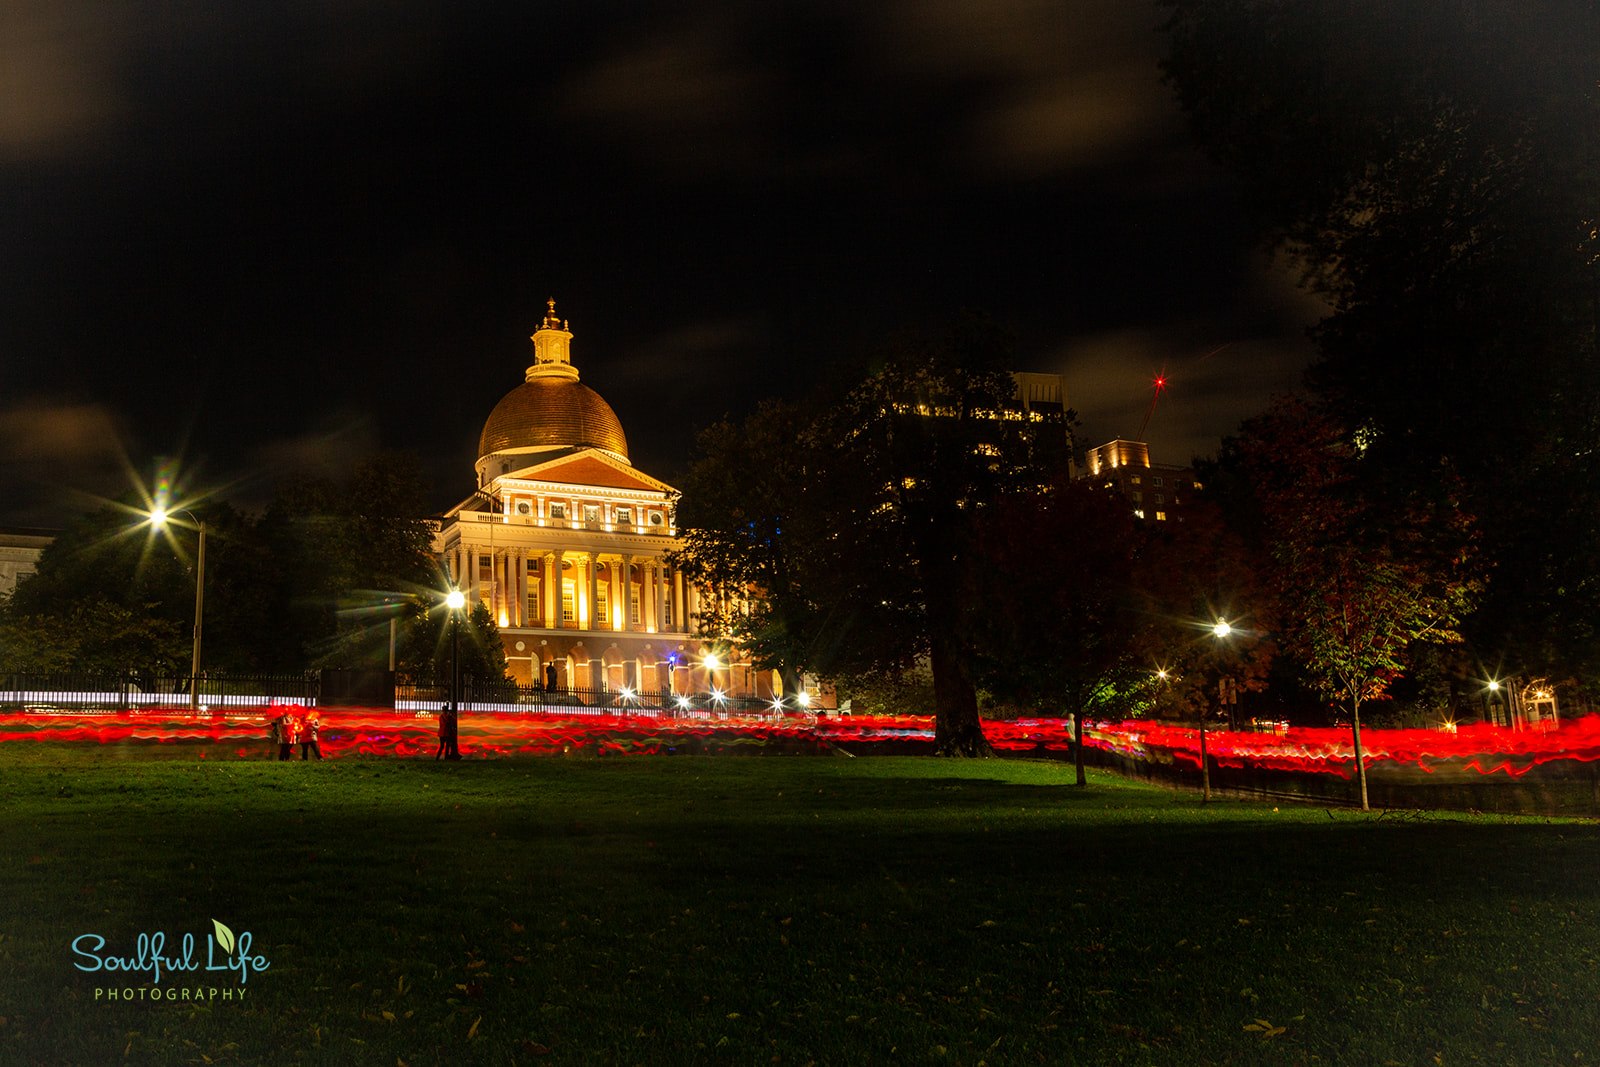 Nighttime image of Massachusetts State house lit up with warm yellow lights. Time-lapse of participants walking in front of the state house makes a red blur across the bottom of the image. 